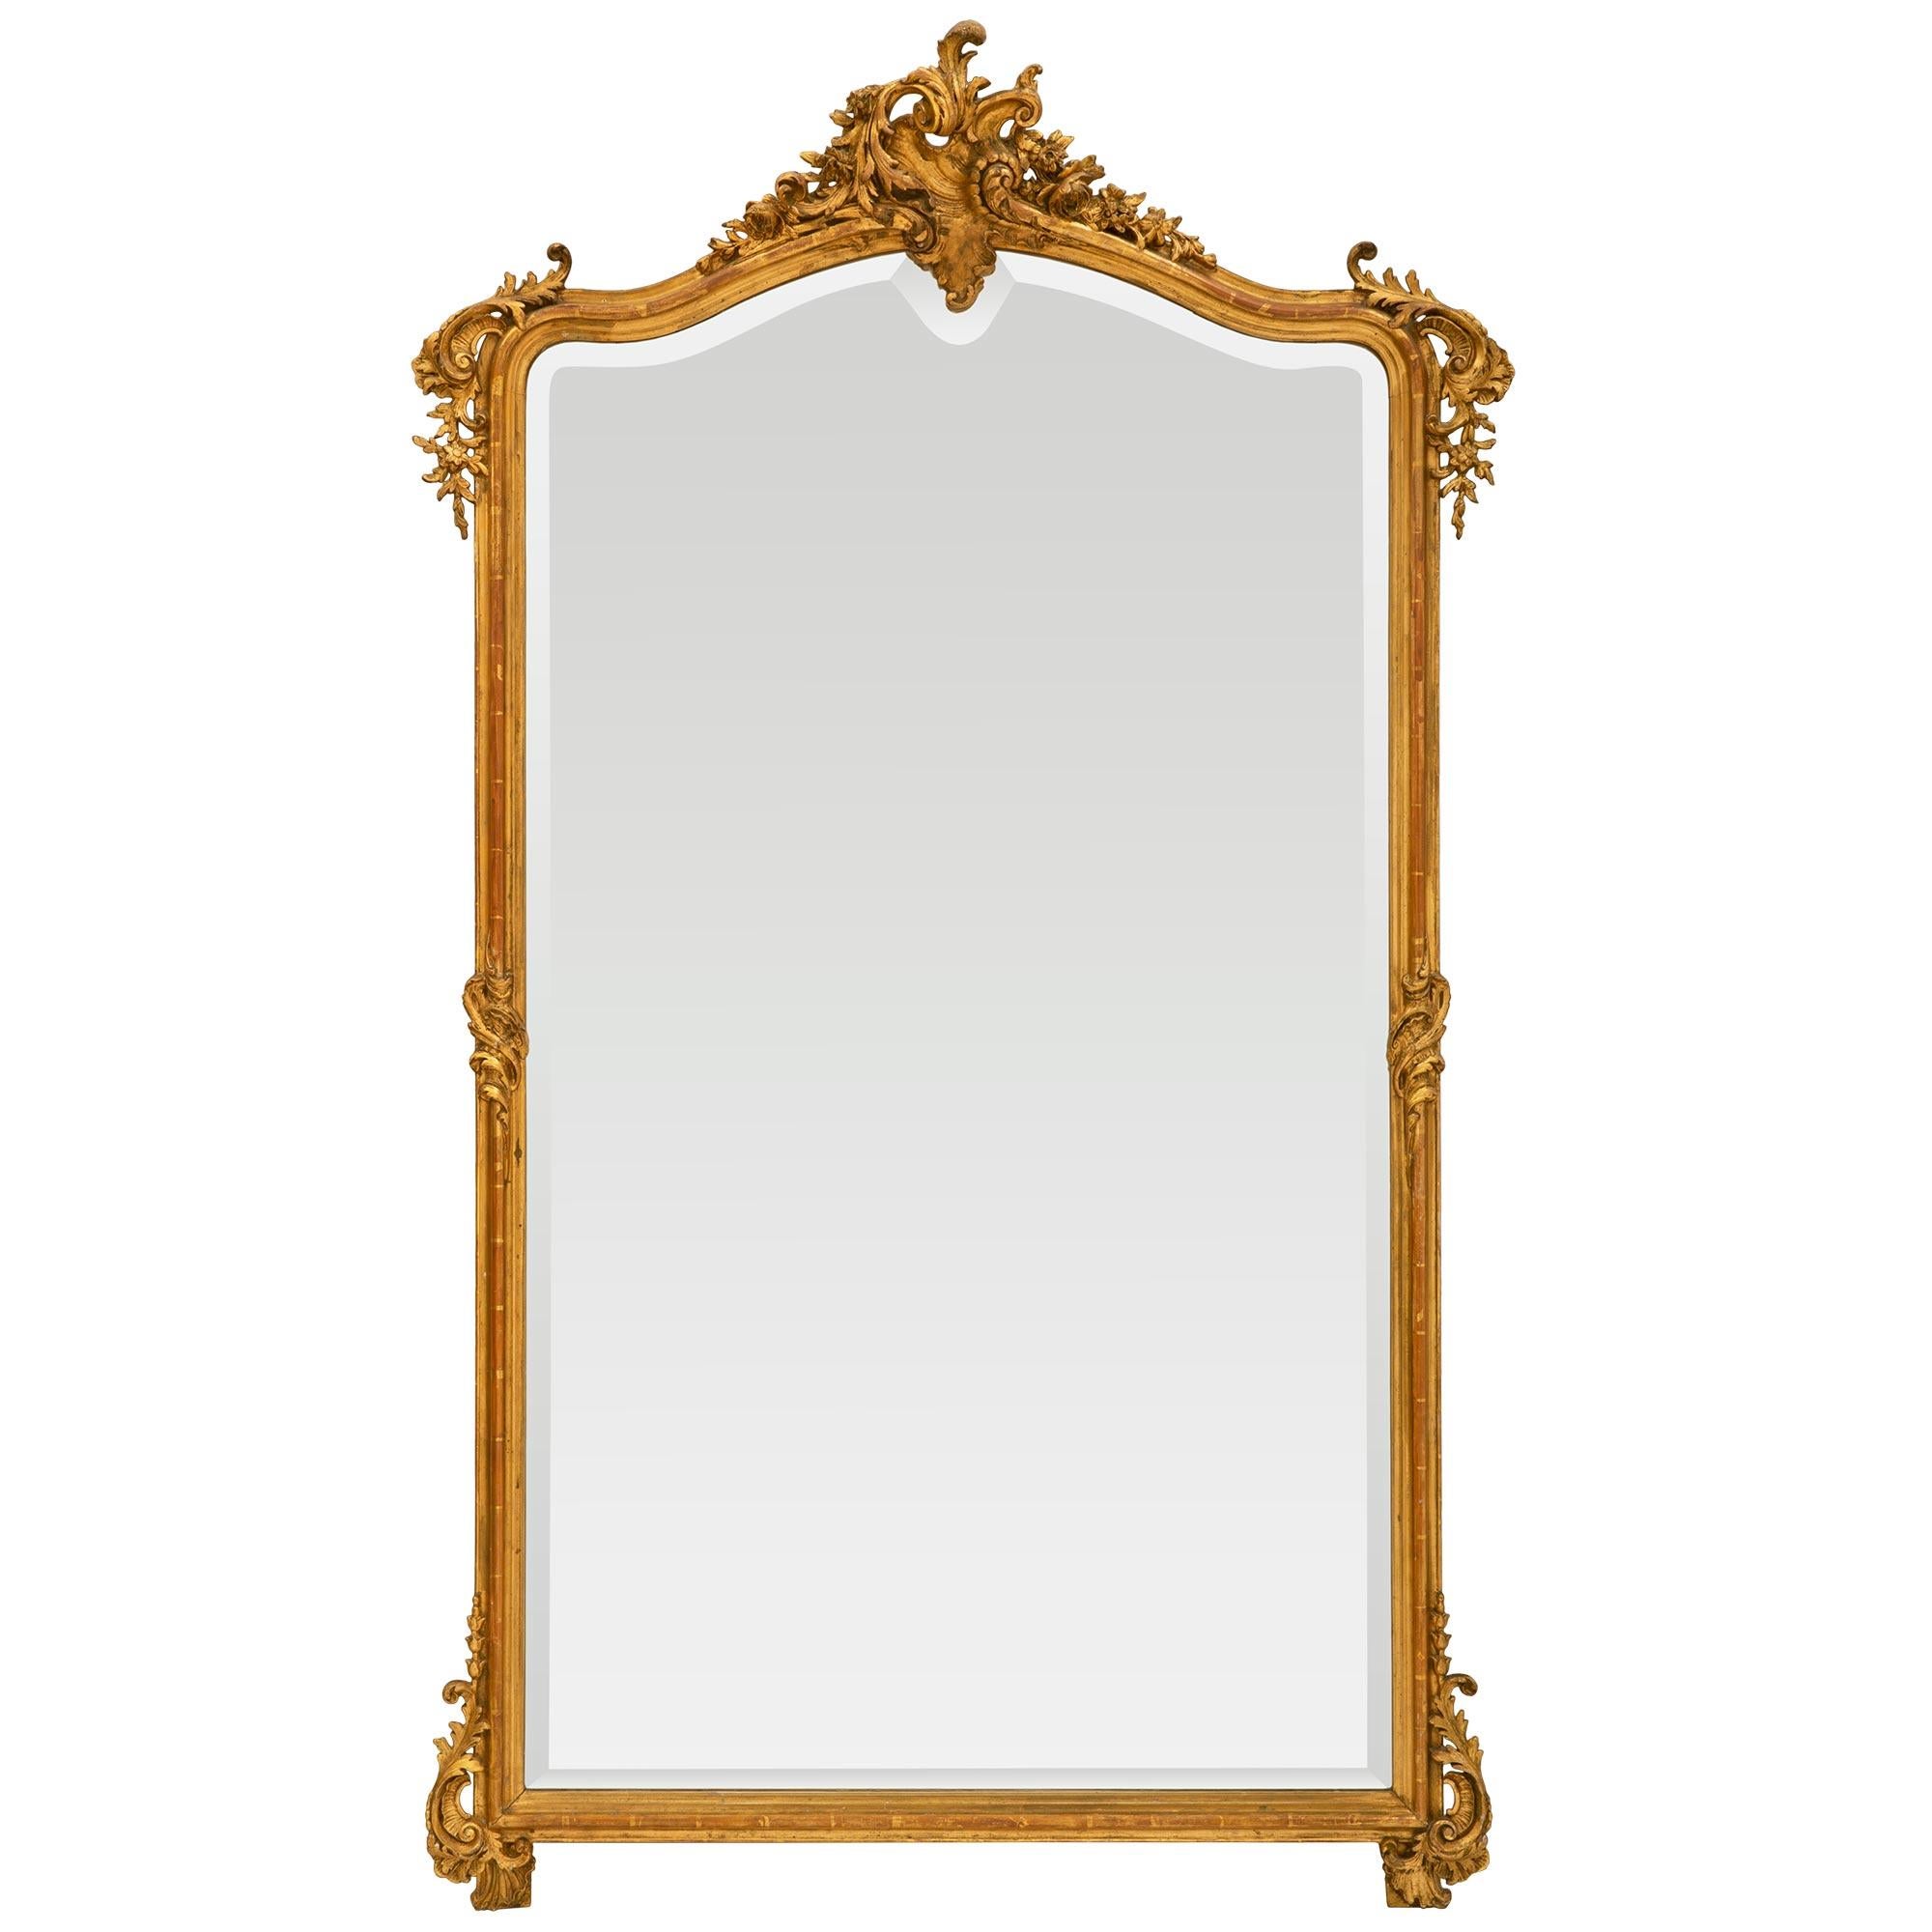 A large and finely carved French 19th Century Louis XV st. giltwood mirror. The mirror with all of its original gilt and beveled mirror plate has carvings of a central top reserve with scrolls and each side floral garlands. On all four corners of